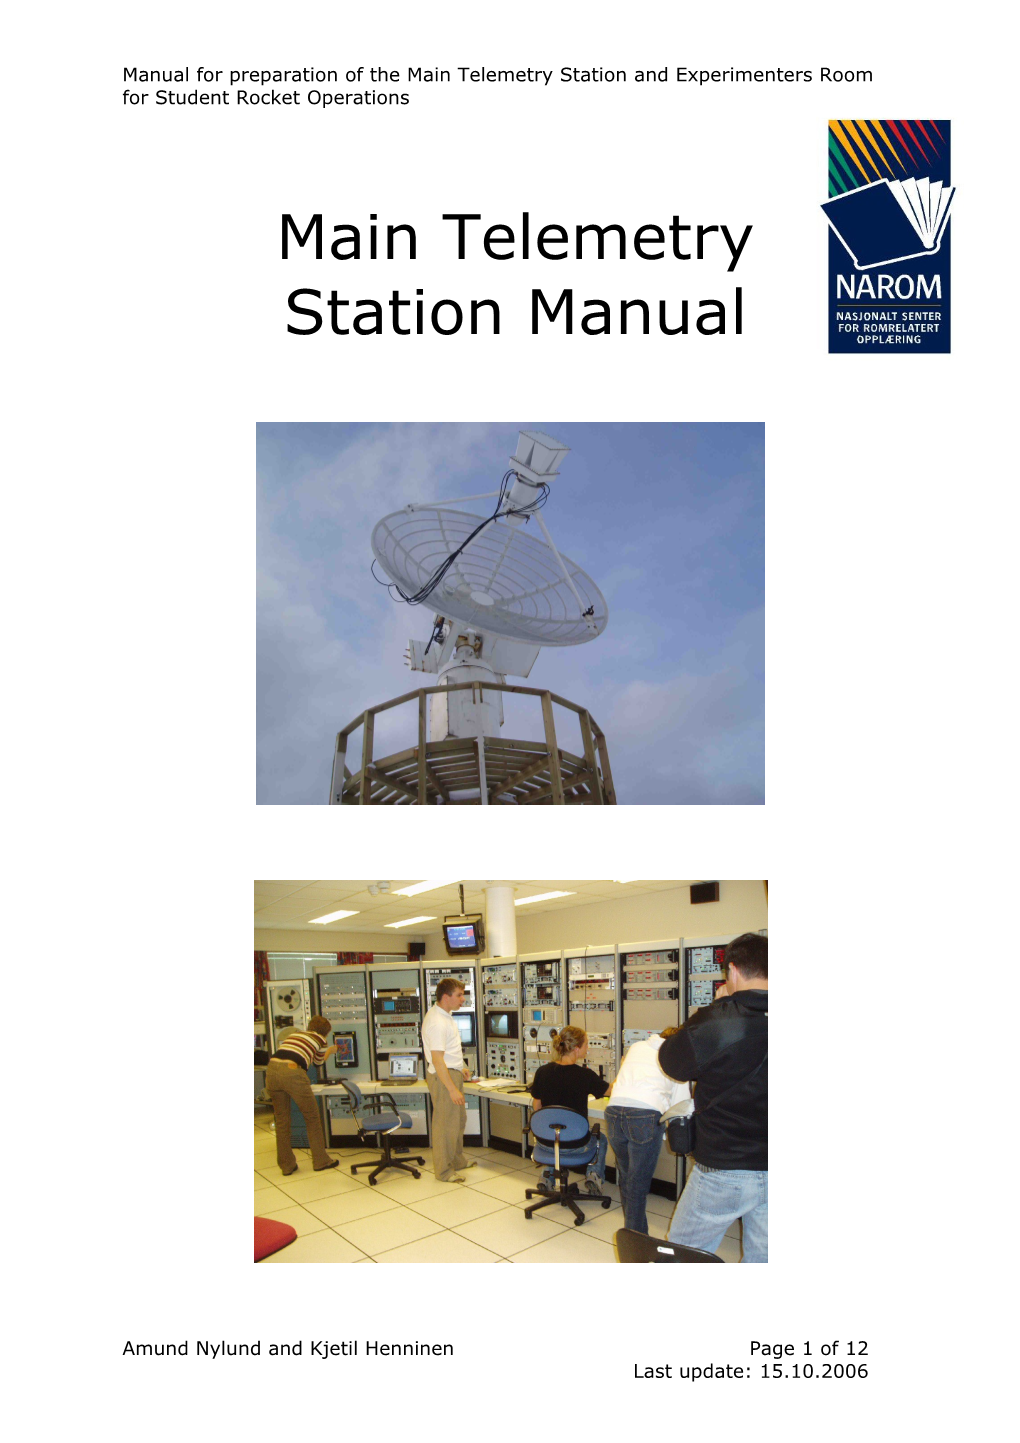 Manual for Preparation of the Telemetry Stations at Andøya Rocket Range